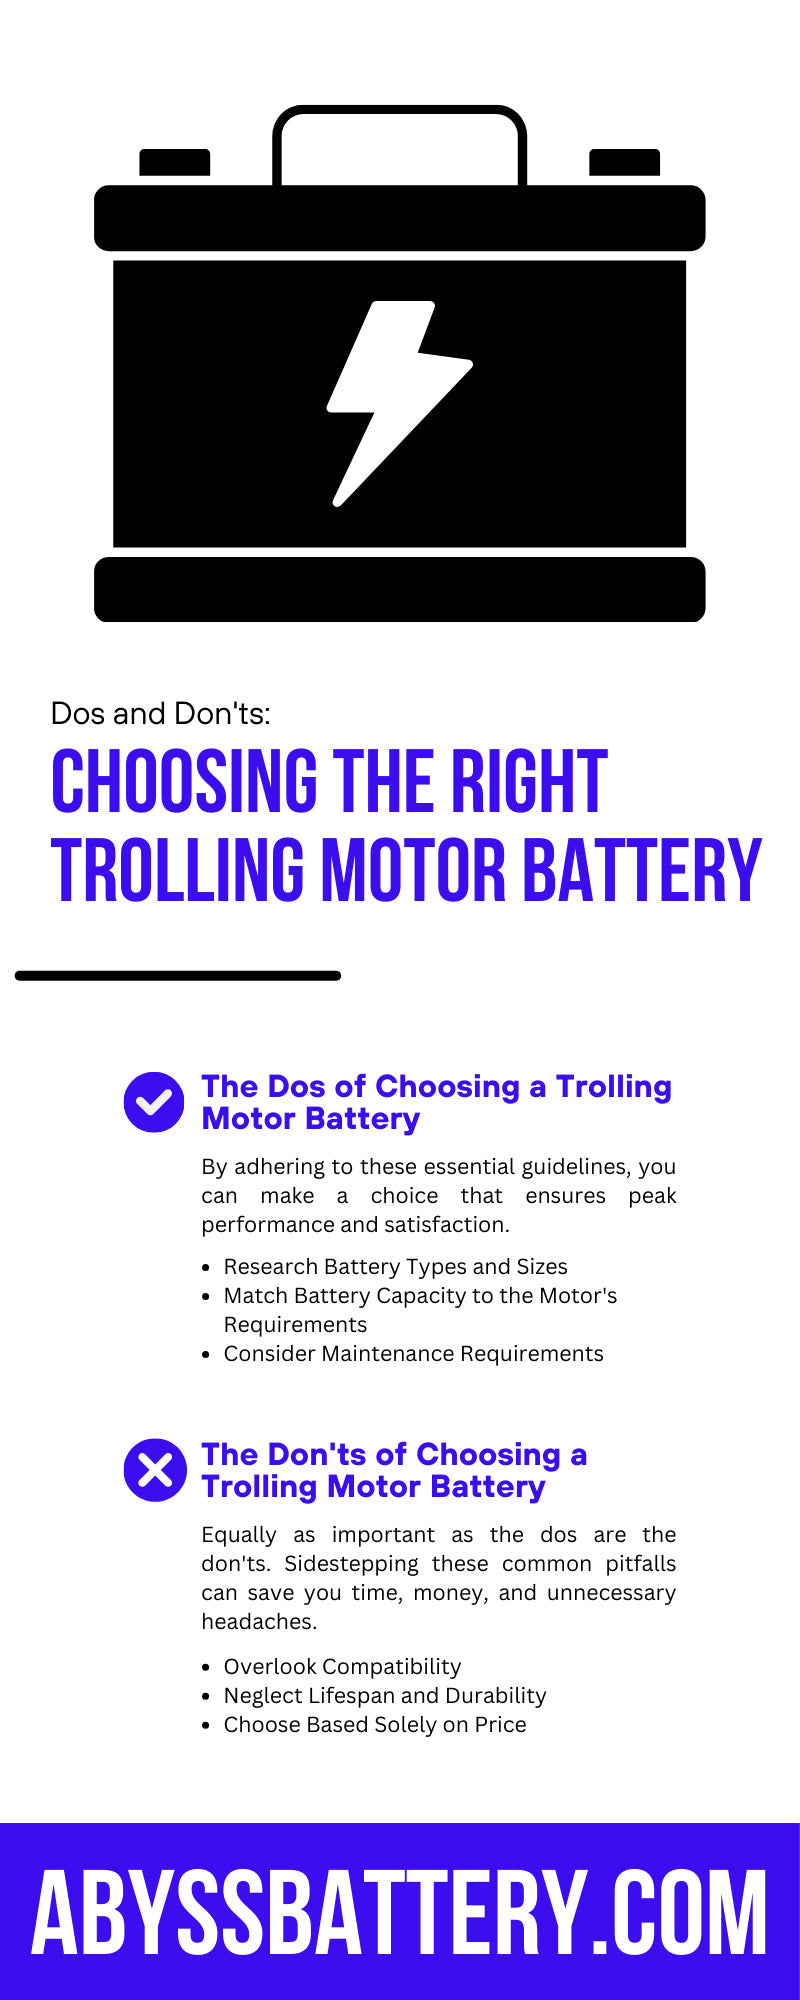 Dos and Don'ts: Choosing the Right Trolling Motor Battery